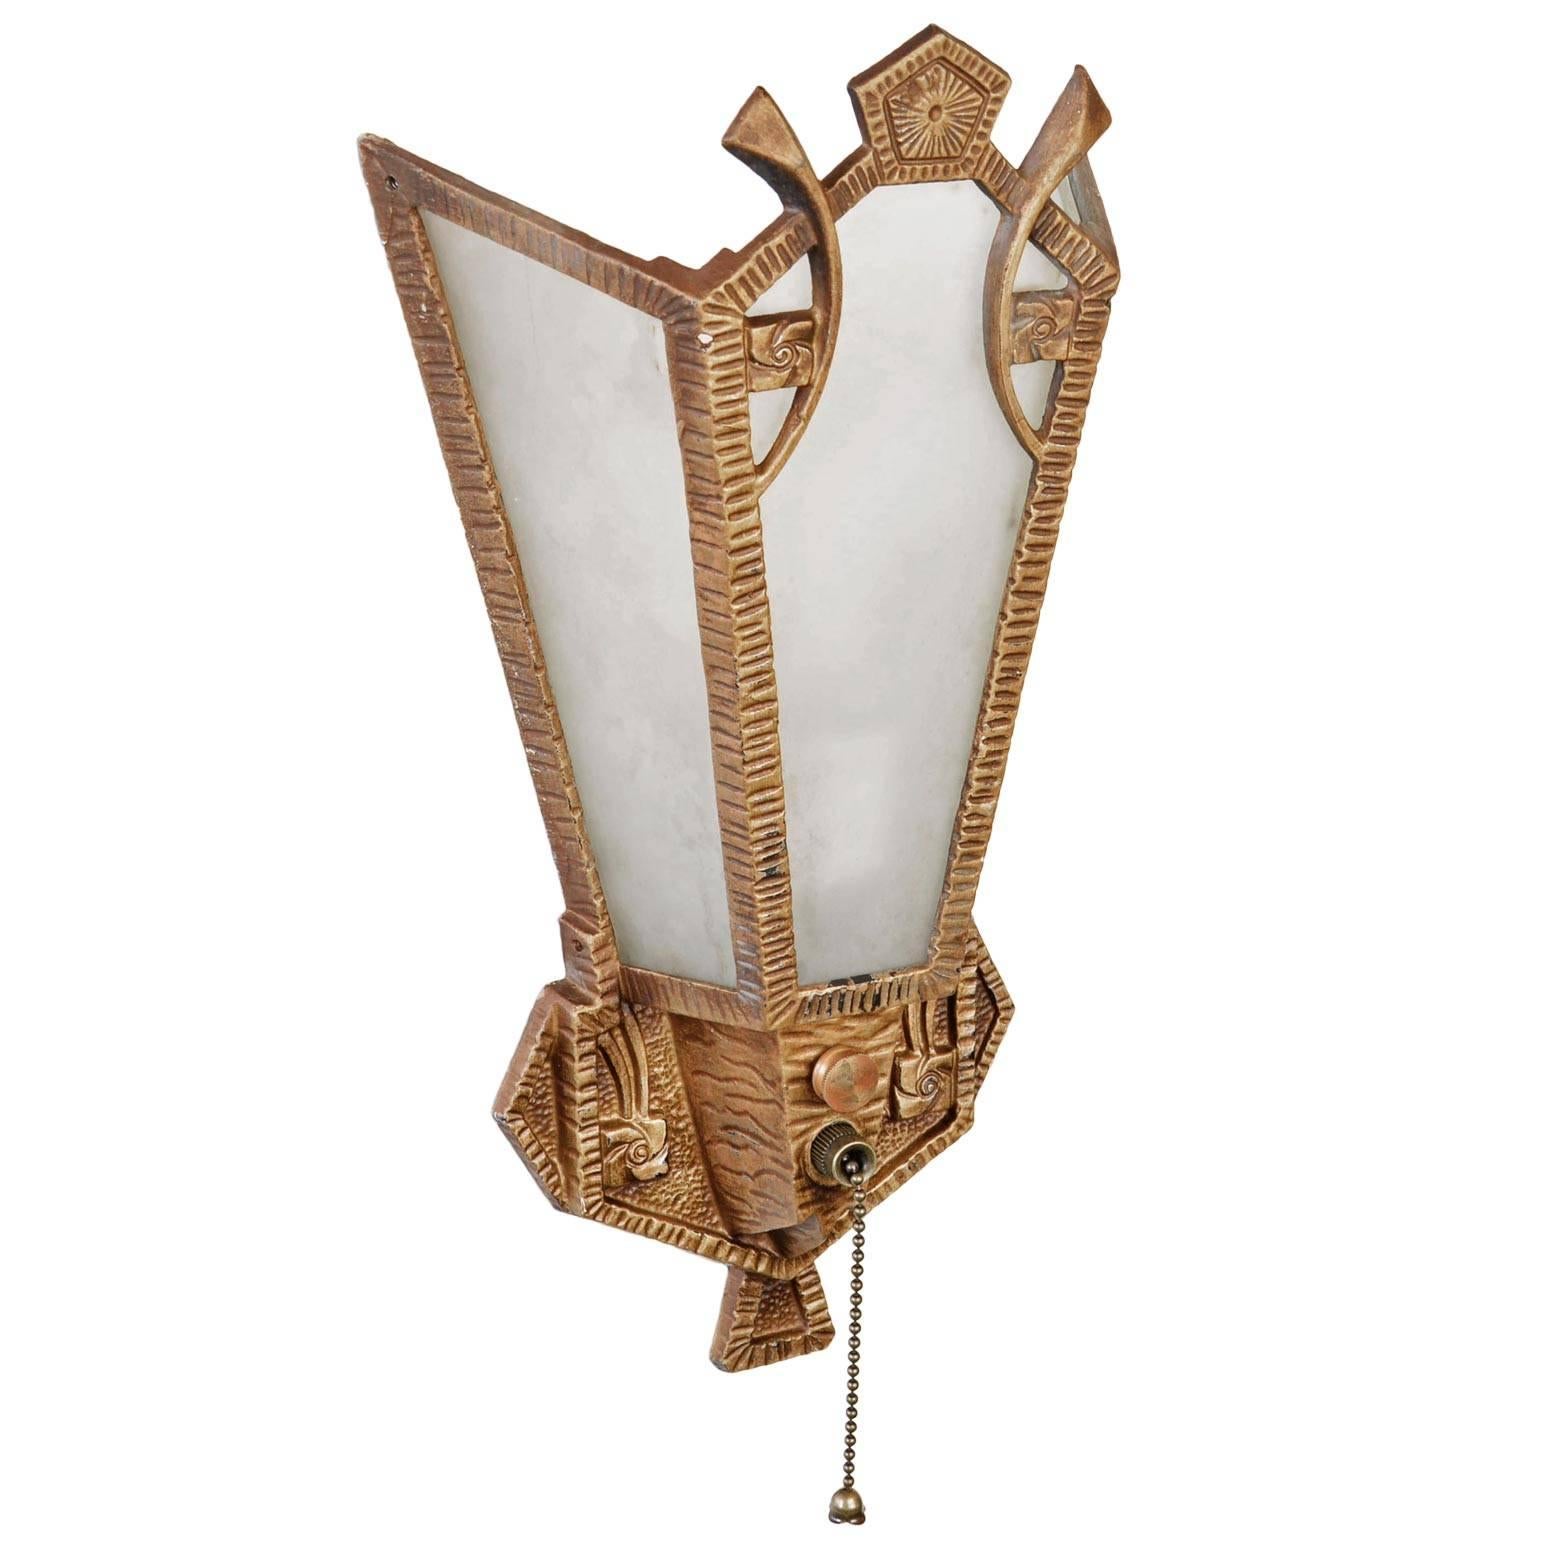 Beautiful Art Deco sconce with a body of cast aluminum with stylized floral motifs and geometric designs. Each has three etched glass panels that mount in and create a warm glow when lit. 

We find that early antique lighting was designed as objects